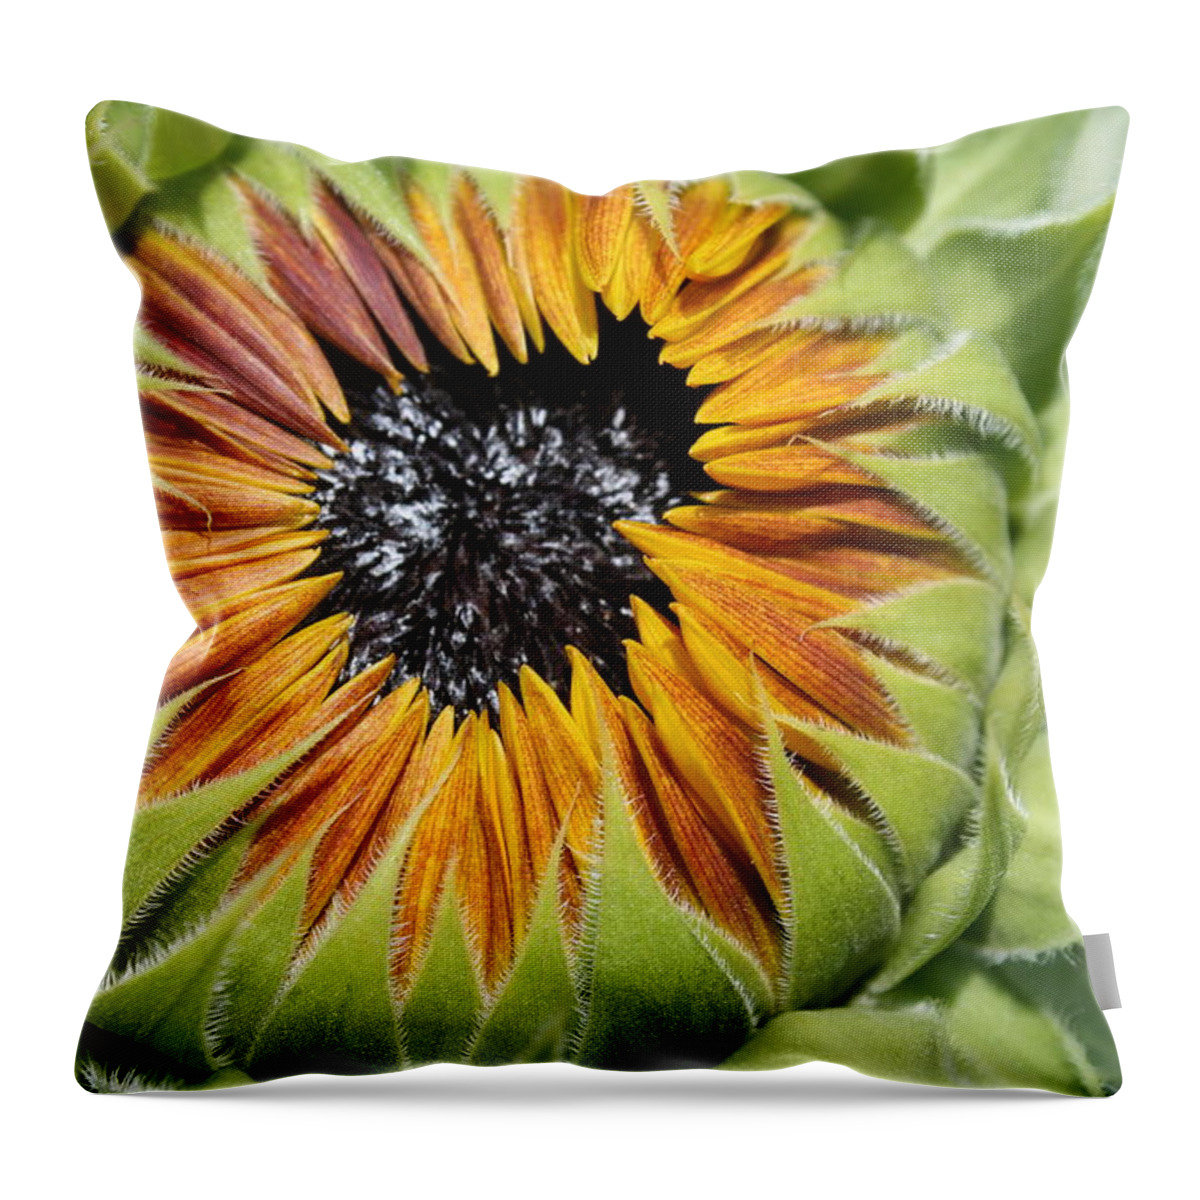 Flower Throw Pillow featuring the photograph Not Yet by James Haney